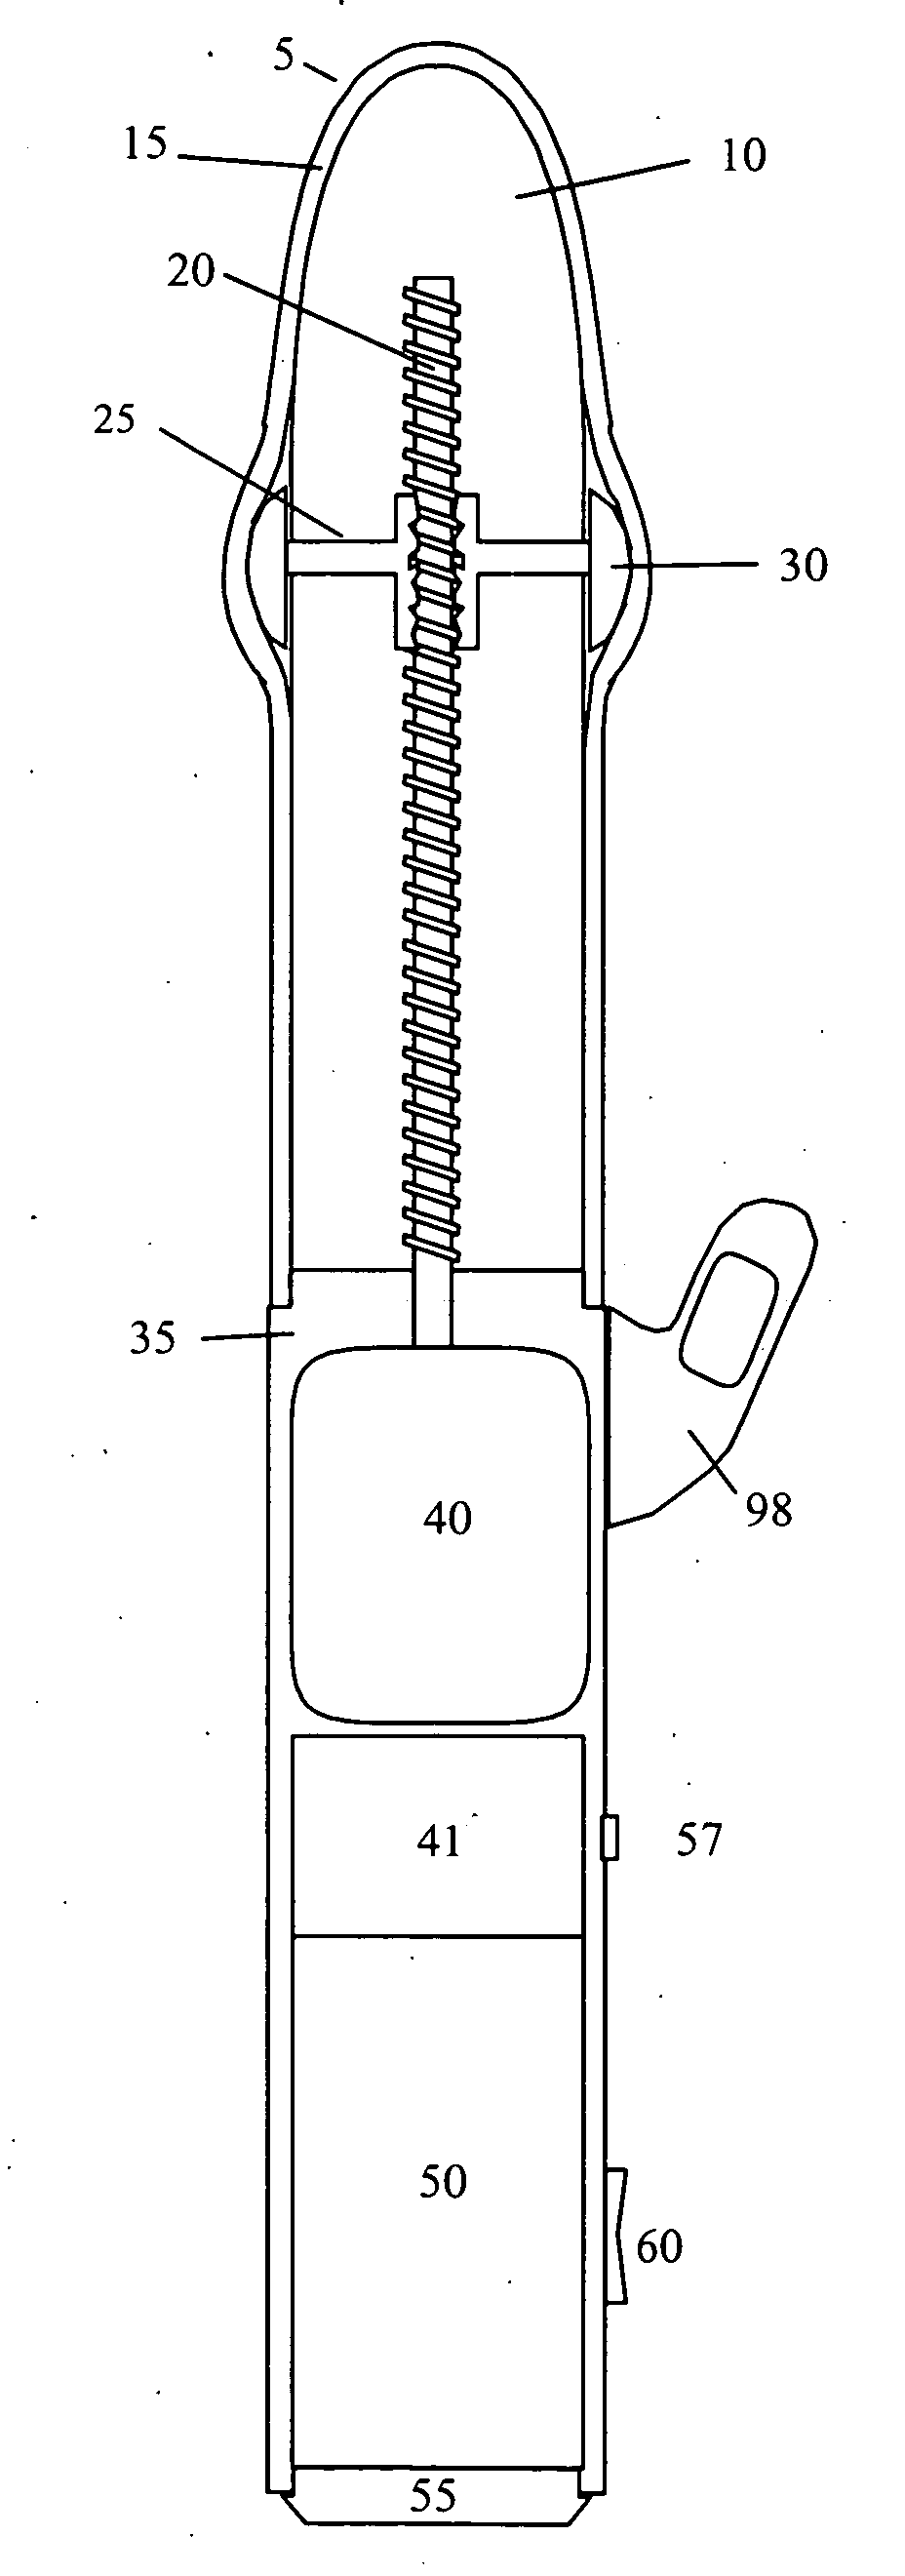 Electronic variable stroke devices and system for remote control and interactive play